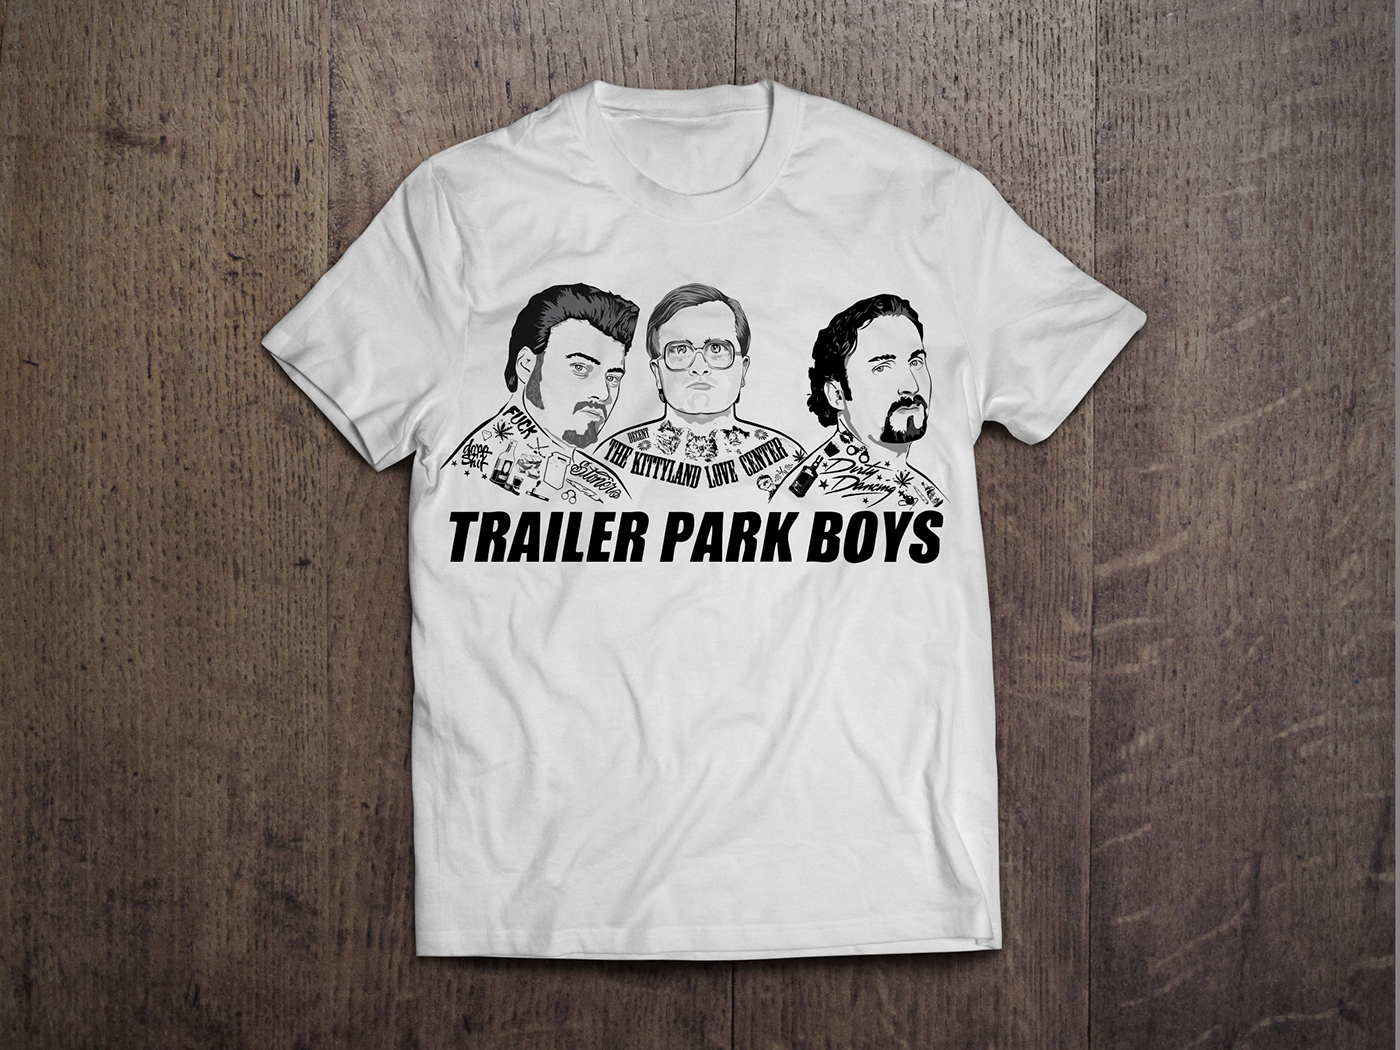 trailerparkboys trailer julian Ricky bubbles tattoo tatttoos male dirtydancing booze alcohol cigarettes dope stars weed